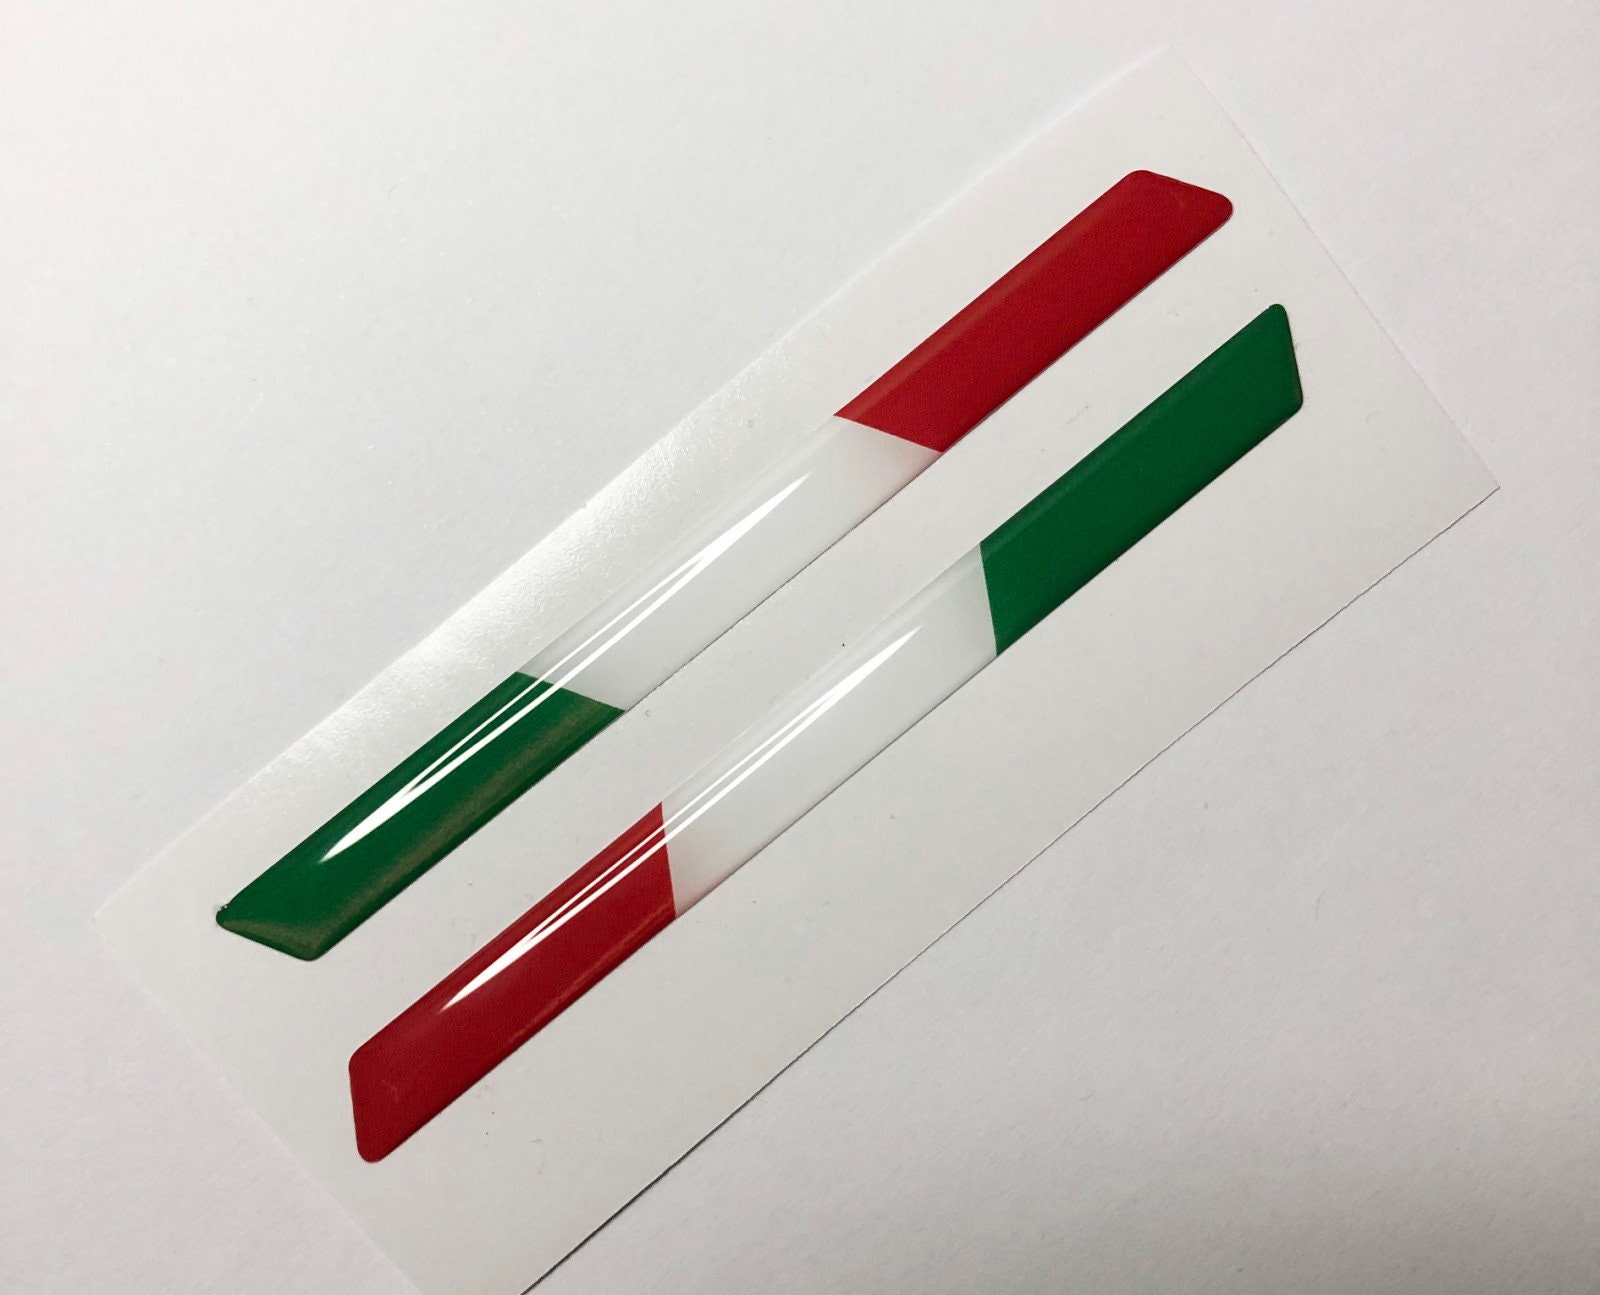 Stickers for Sale  Travel stickers, Stickers, Italian flag